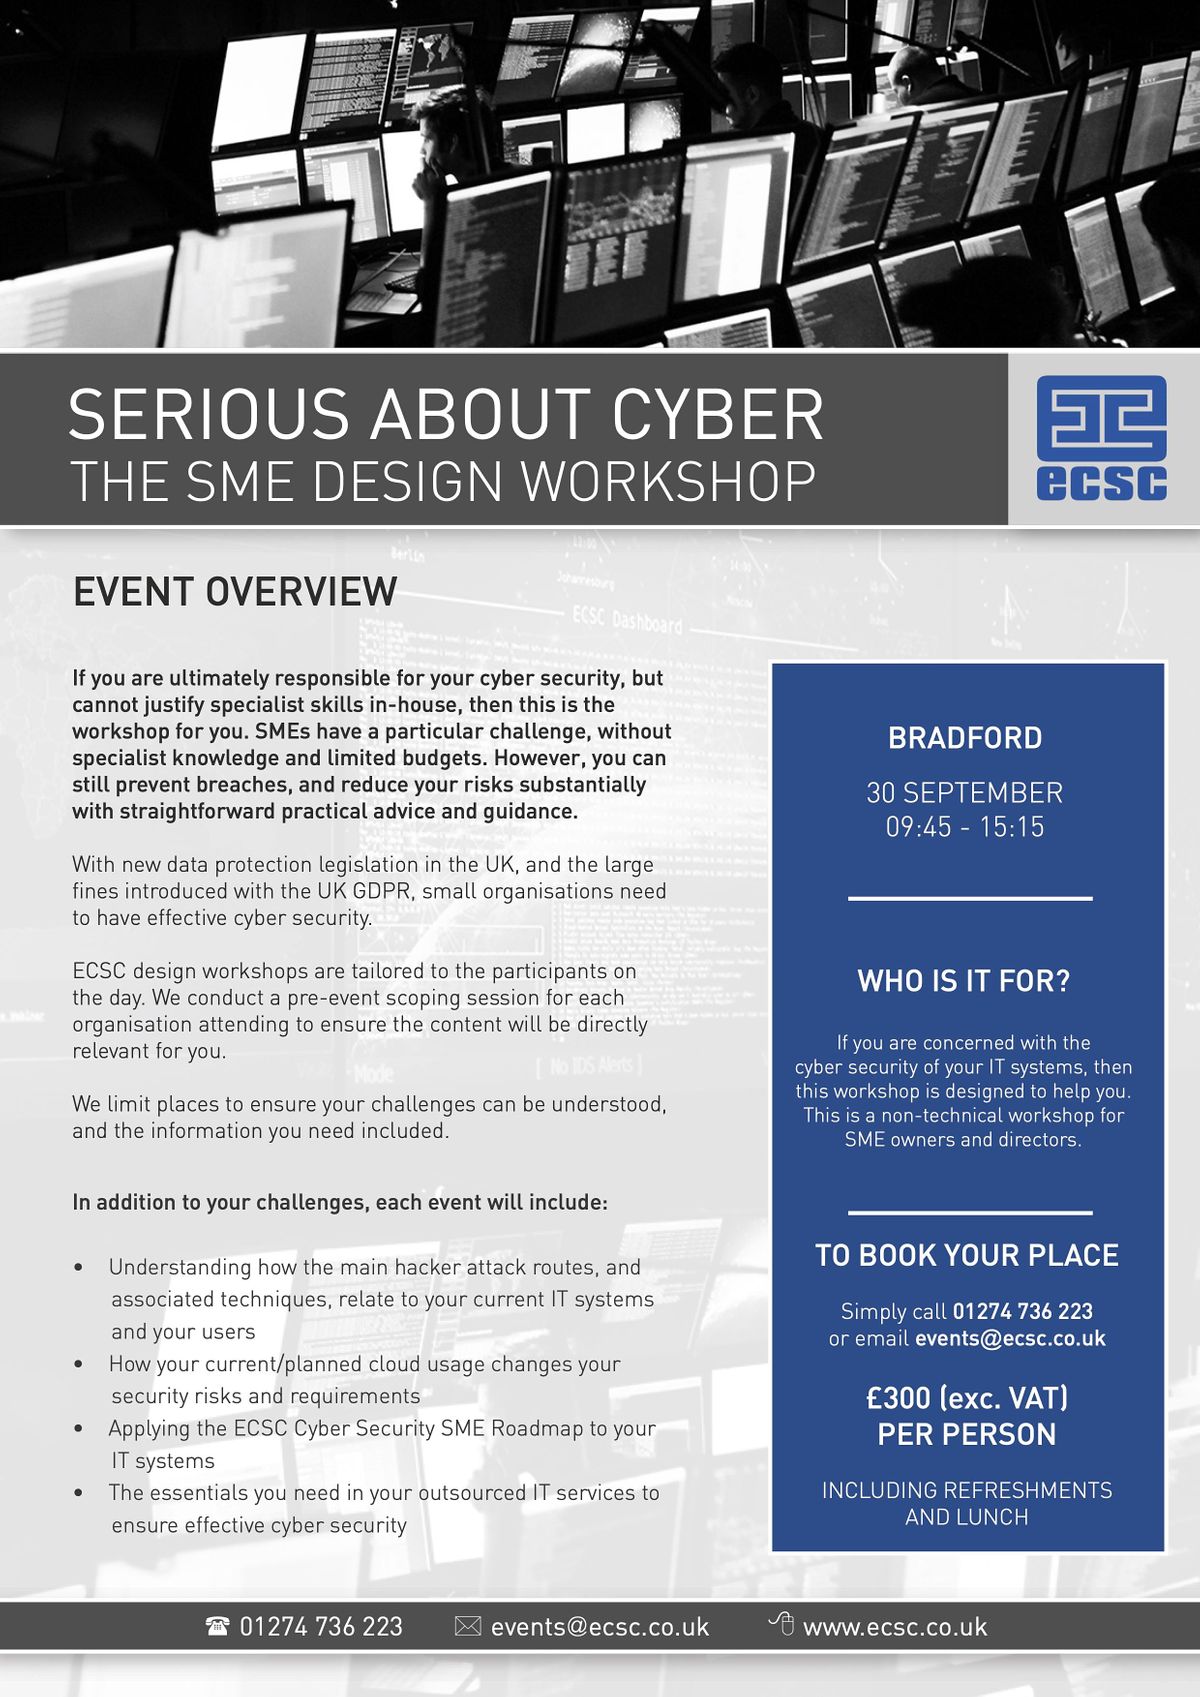 SERIOUS ABOUT CYBER - THE SME DESIGN WORKSHOP